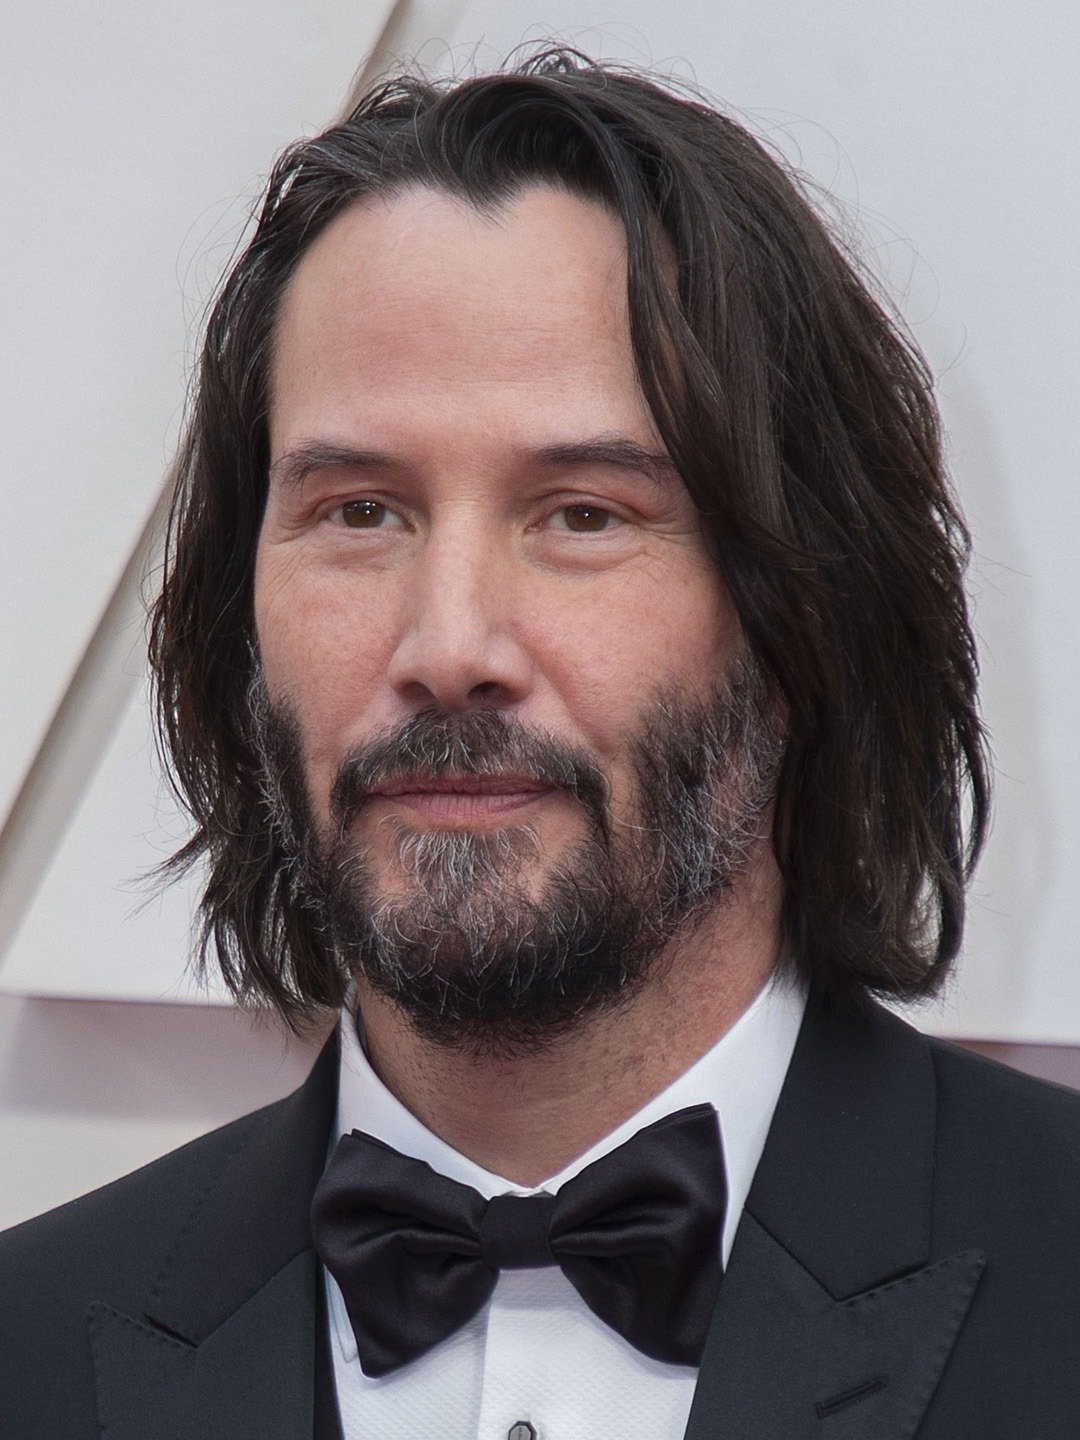 How does John Wick keep his hair out of his face while fighting  Quora